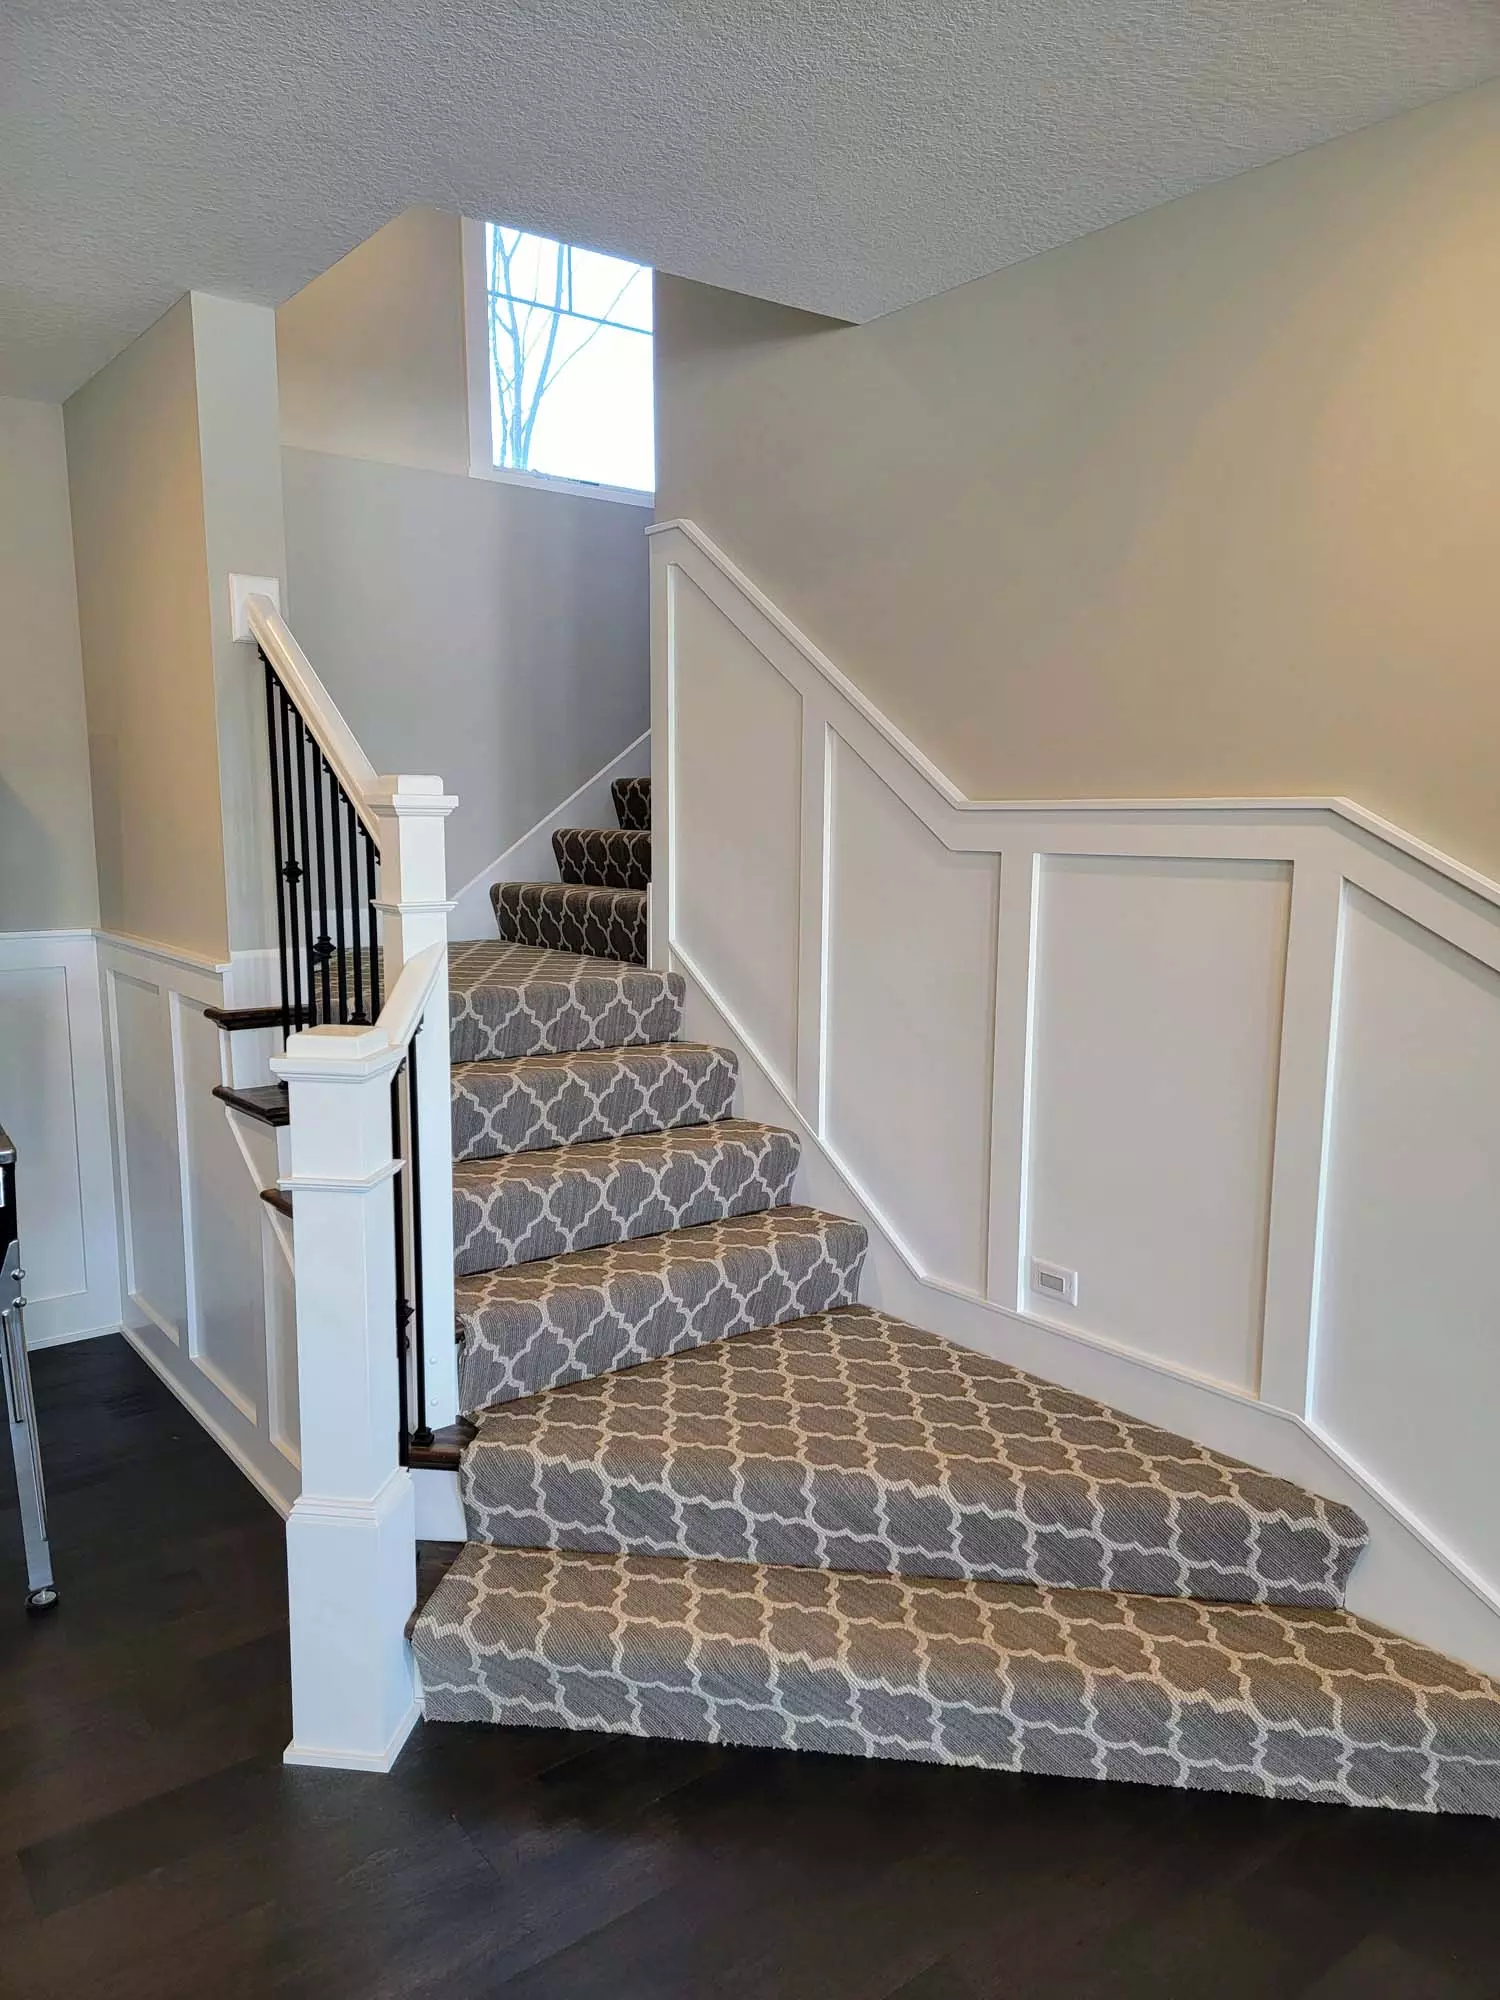 Zigzag staircase with Wainscoting